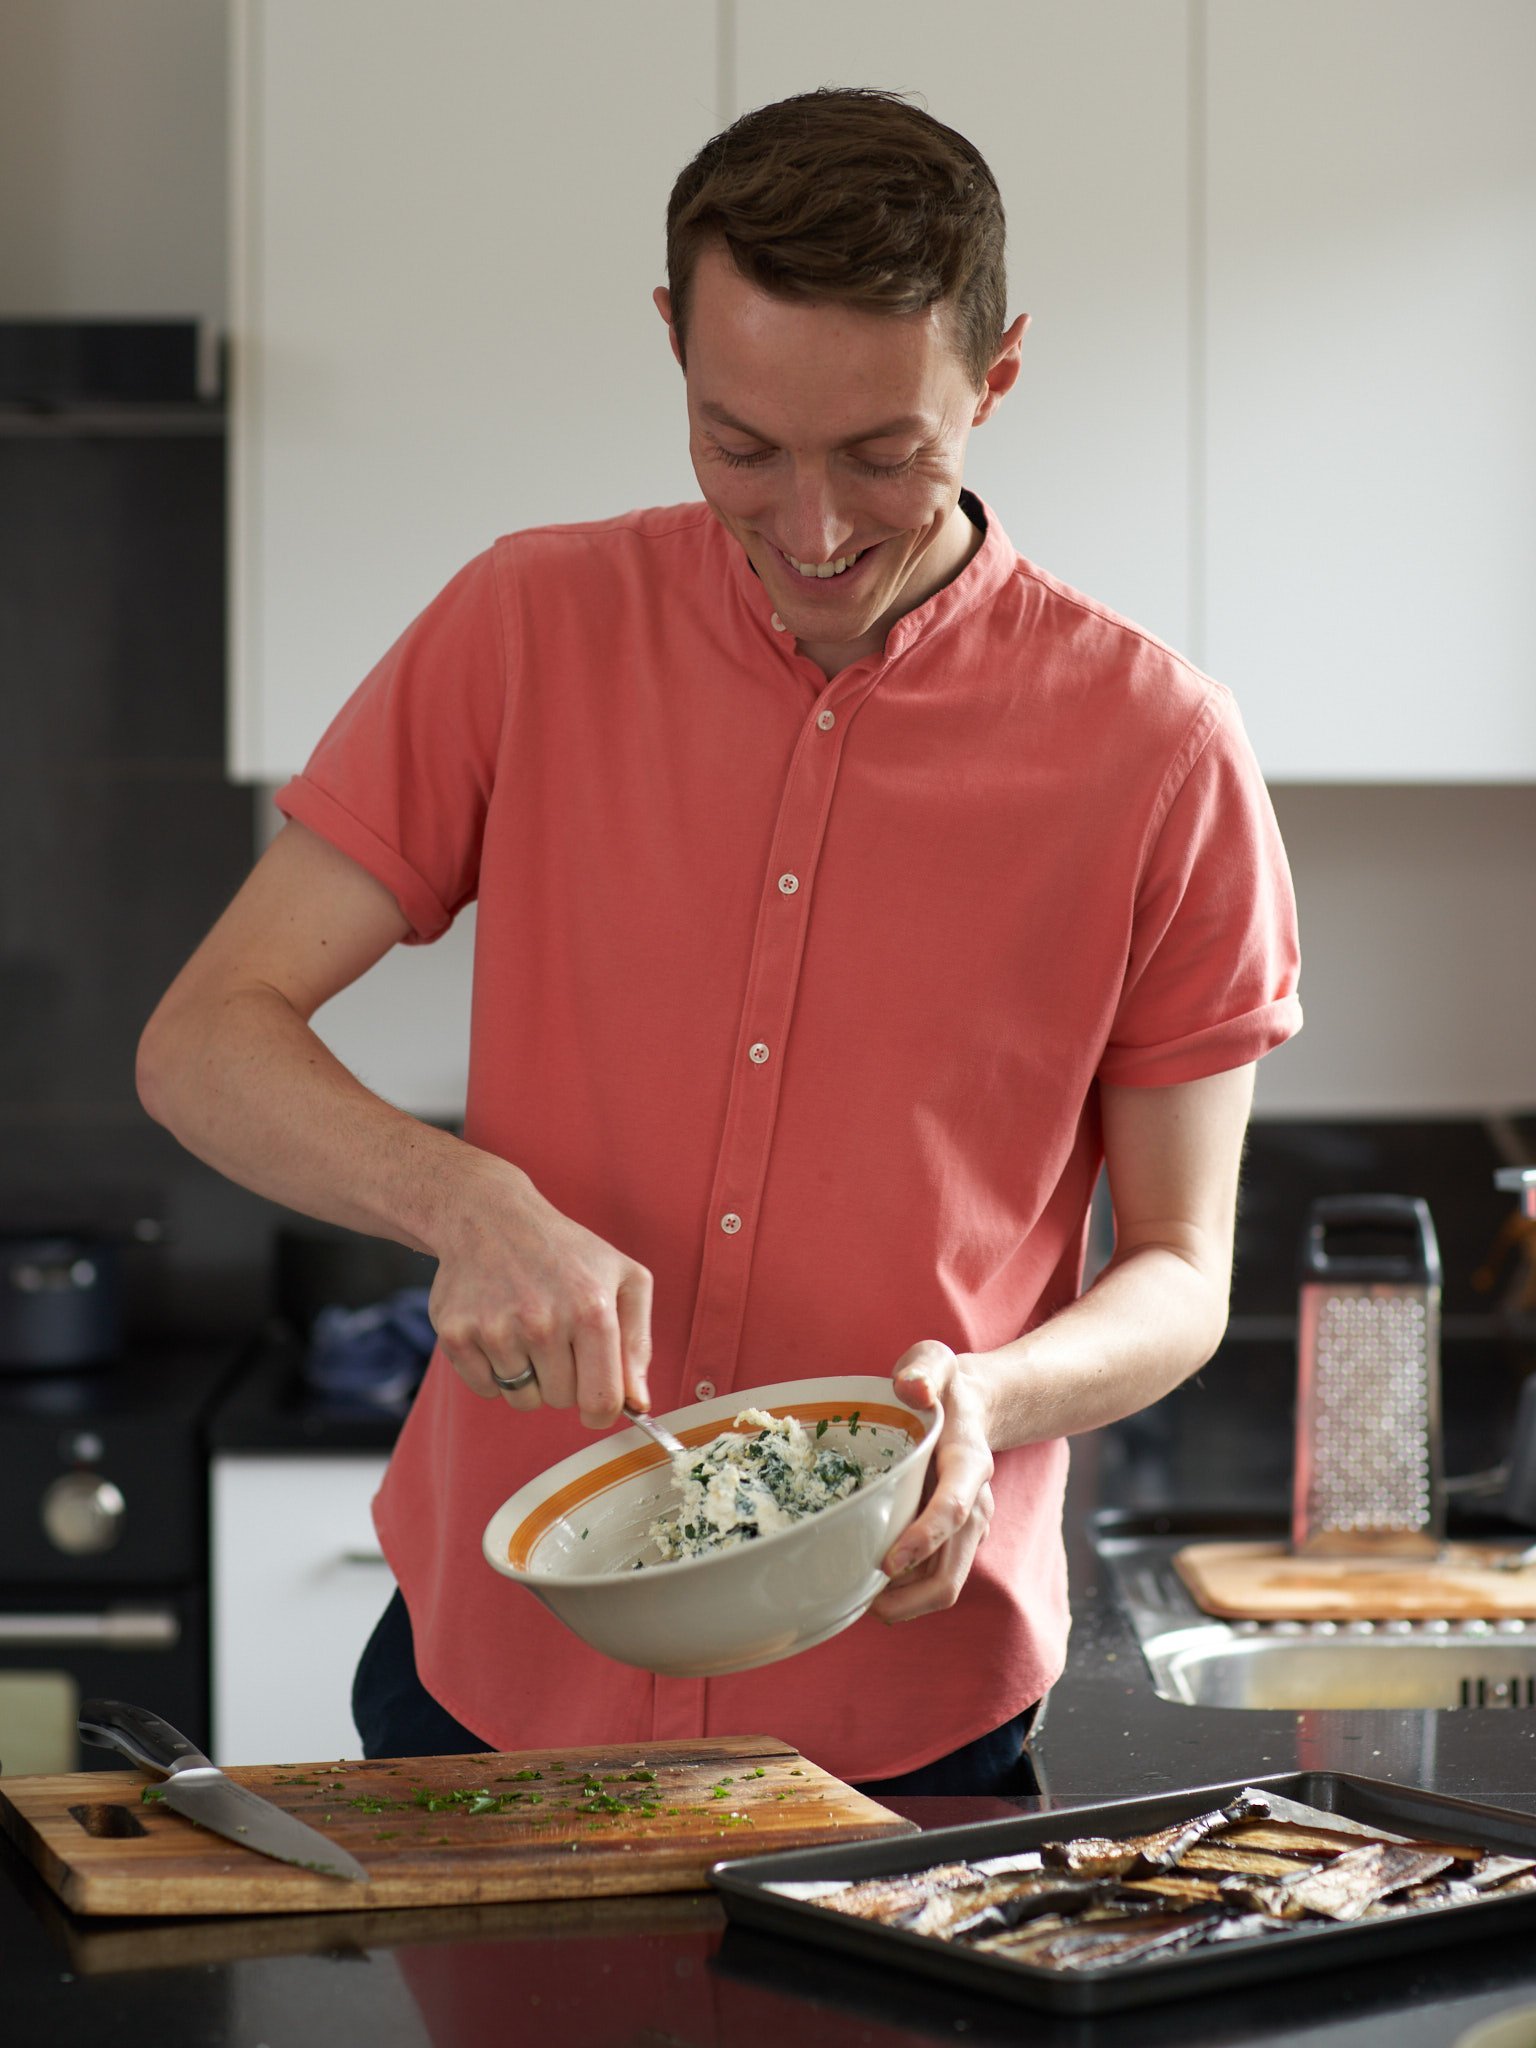 Hailes urges people to enjoy cooking and use their senses in the kitchen. Photo: Aaron McLean